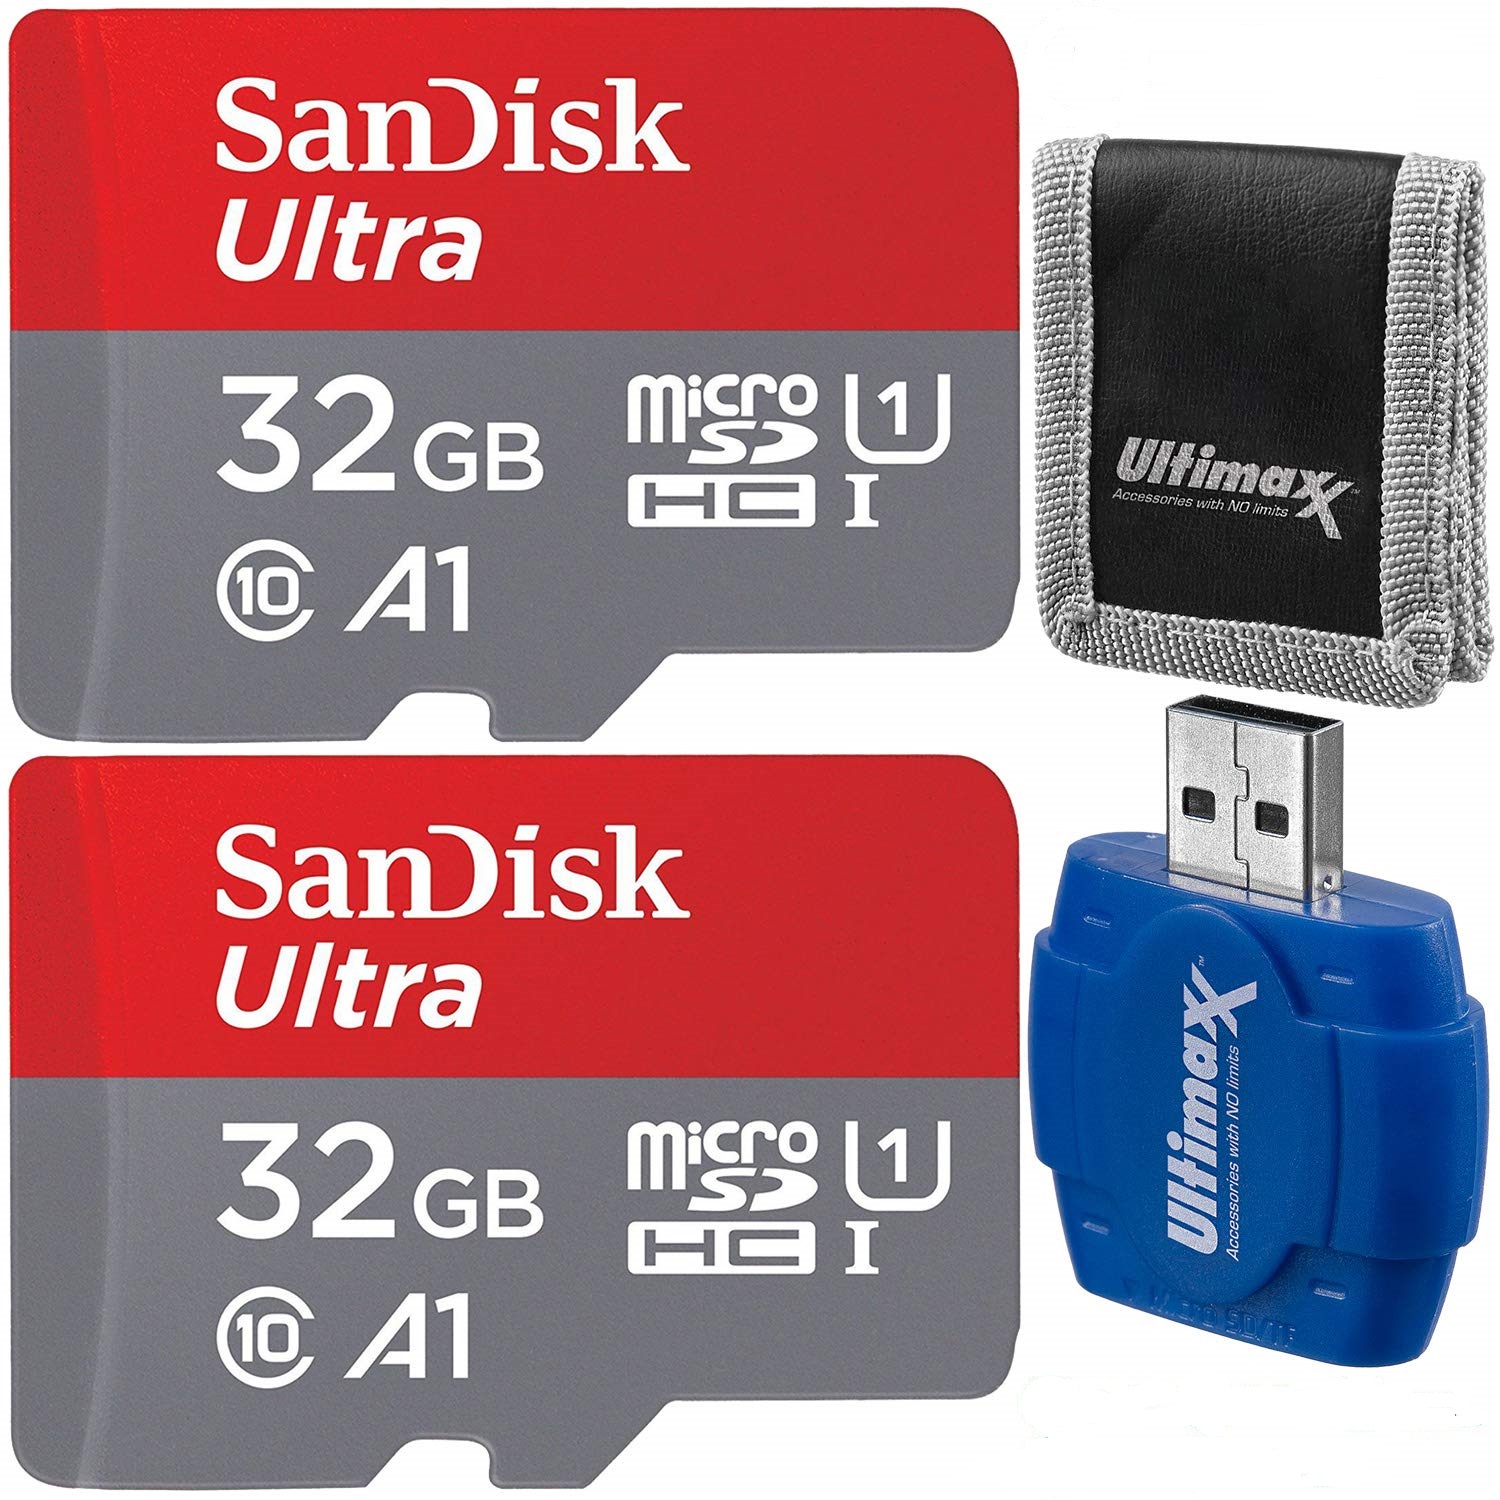 Dual SanDisk Ultra 32GB microSDHC UHS-I/Class-10 Memory Cards with High Speed Memory Card Reader & Memory Card Wallet